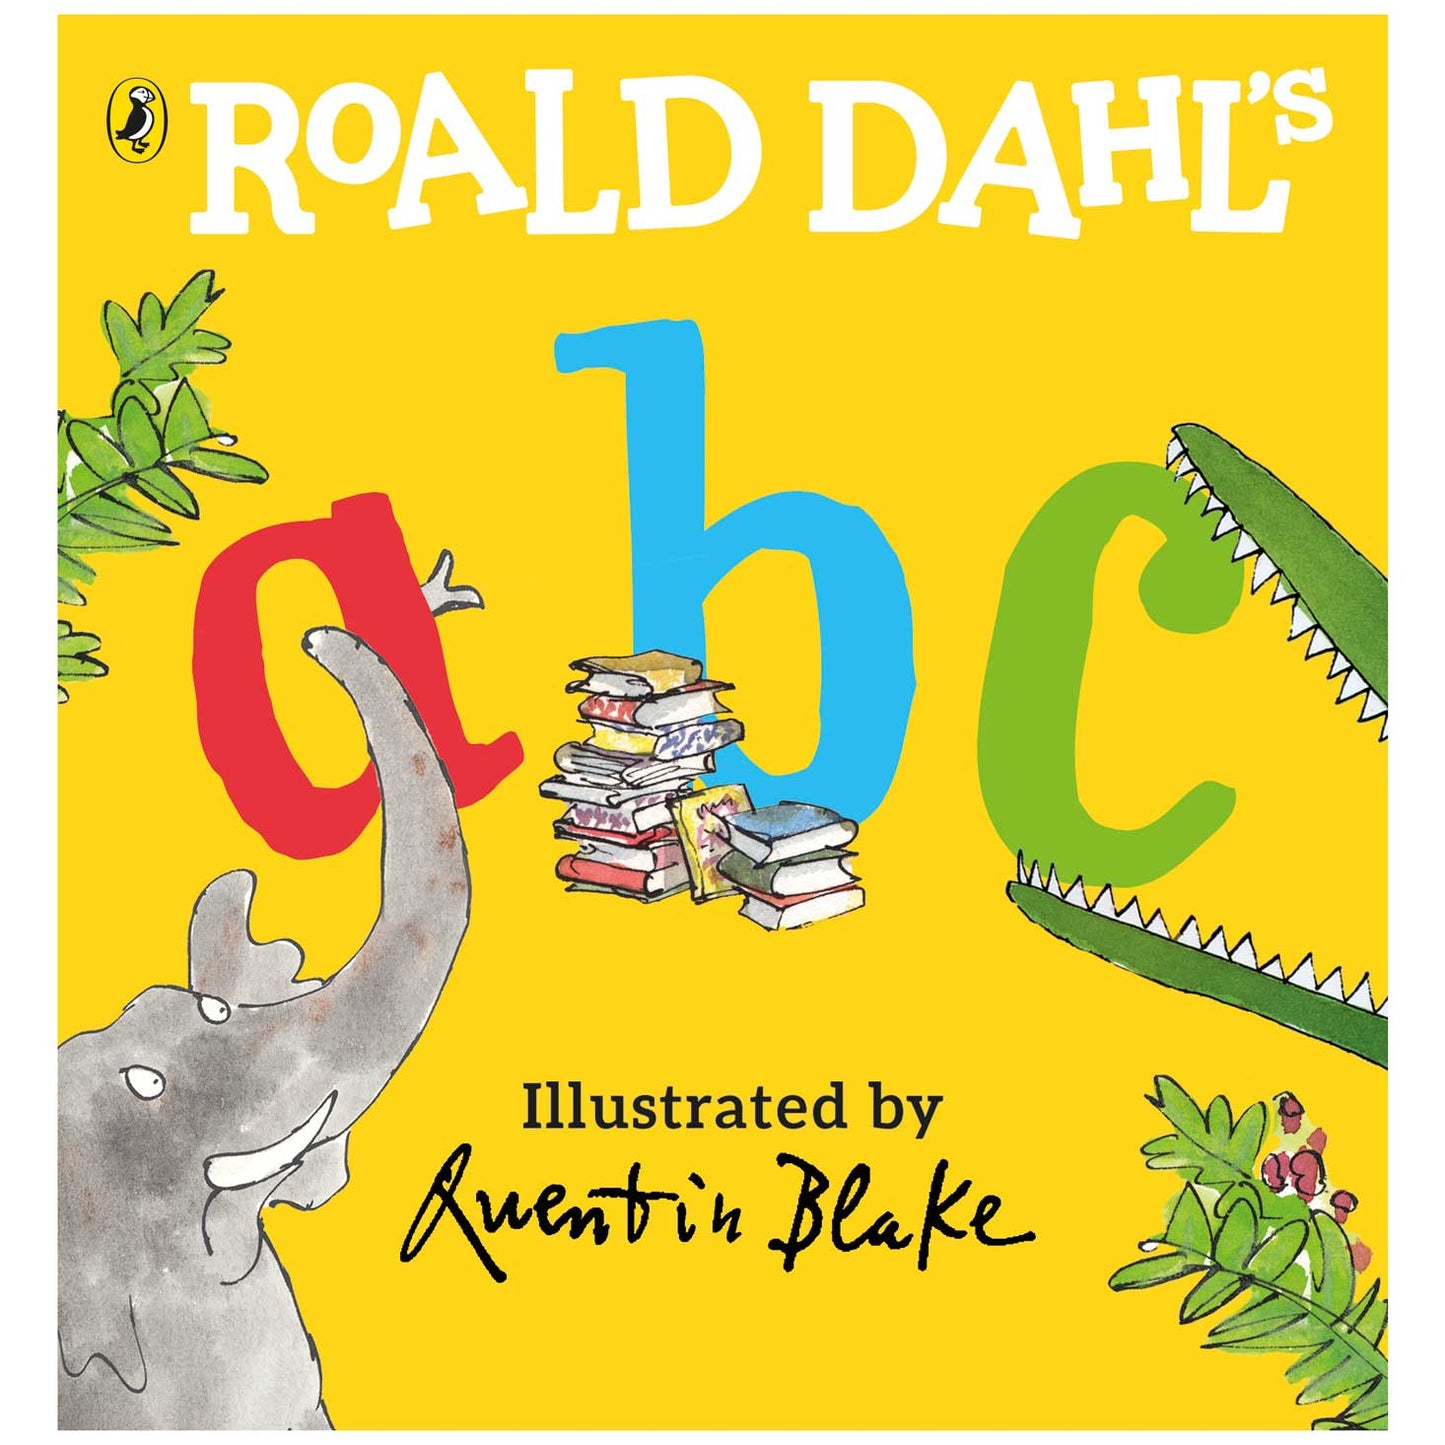 Roald Dahl's ABC, a board book for toddlers